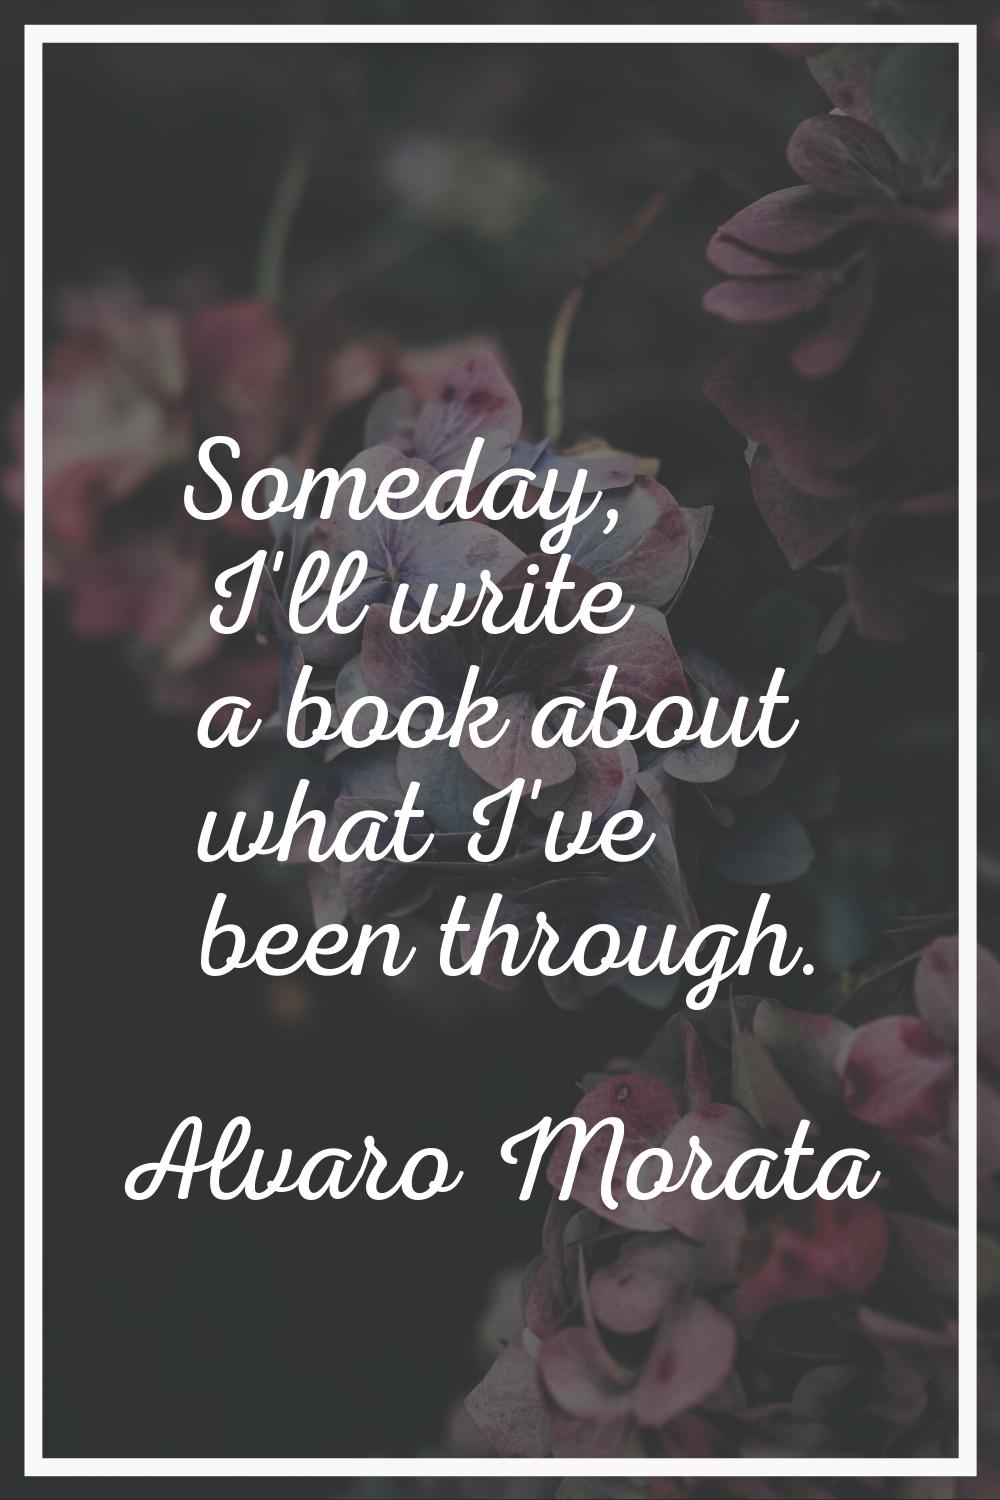 Someday, I'll write a book about what I've been through.